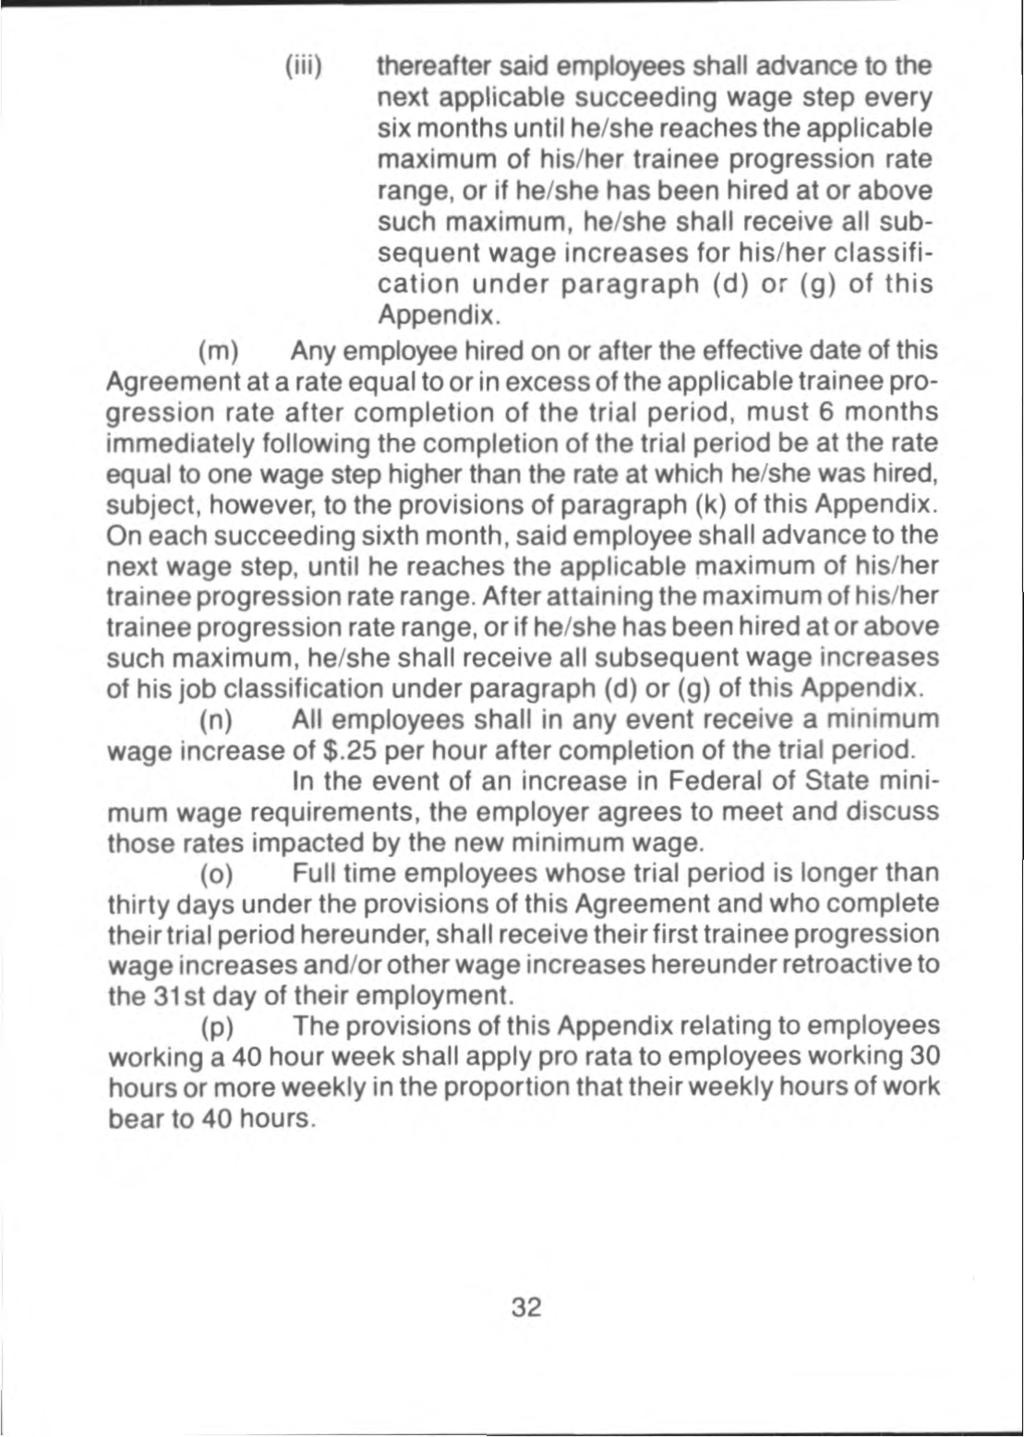 (iii) thereafter said employees shall advance to the next applicable succeeding wage step every six months until he/she reaches the applicable maximum of his/her trainee progression rate range, or if